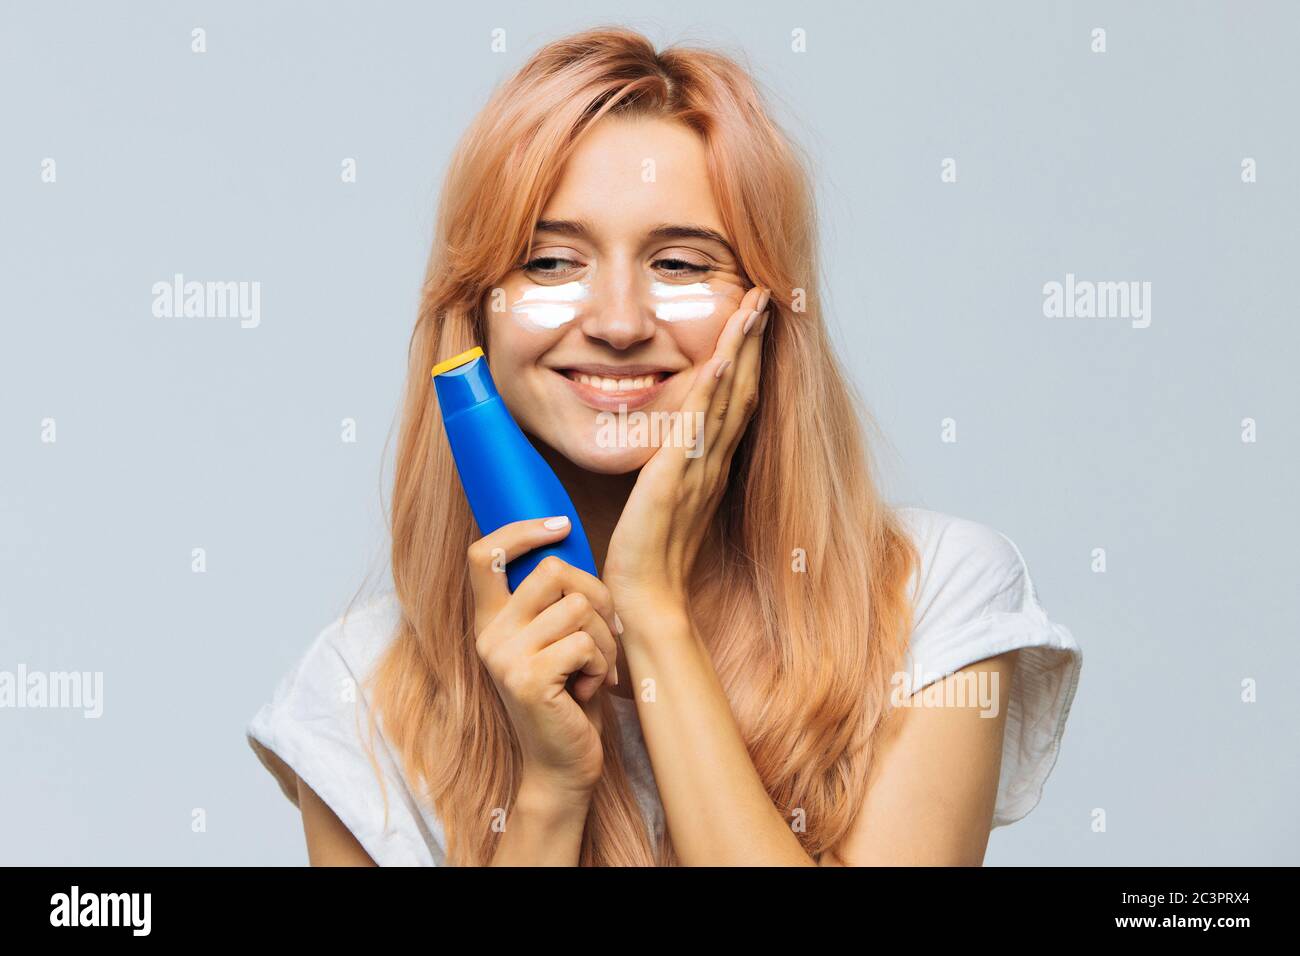 Portrait of young joyful cute woman smiling and applying suntan cream (sunscreen lotion) on face. Pretty female smeared face, cheeks with sun protecti Stock Photo